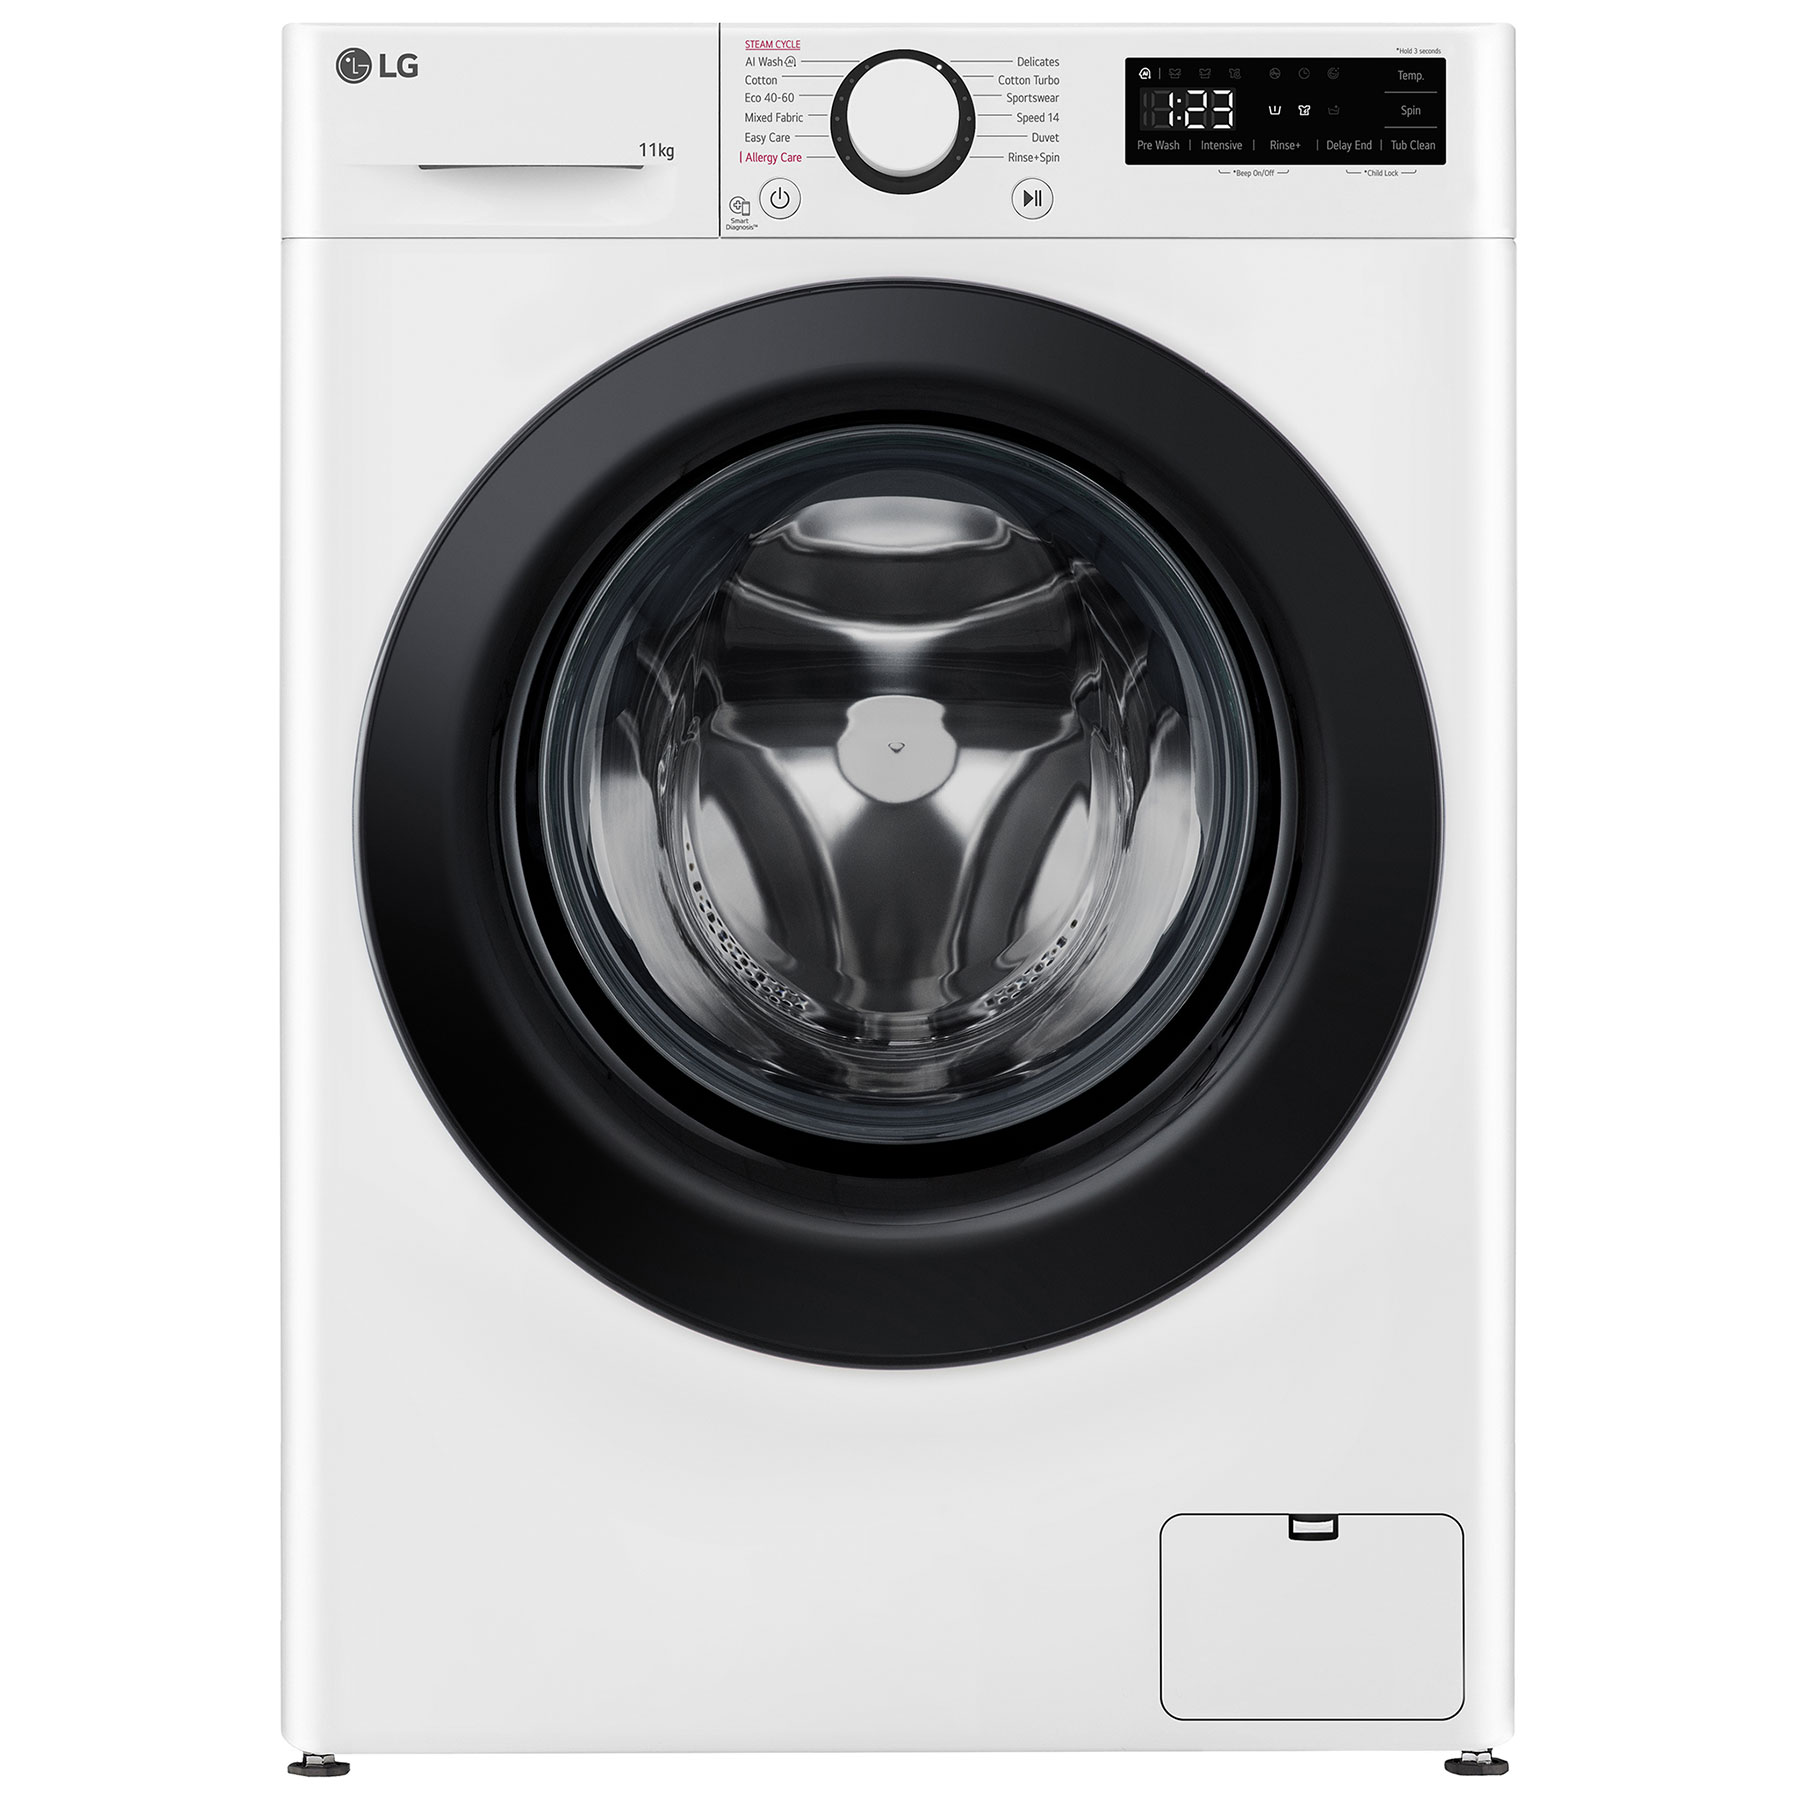 Image of LG F4Y511WBLN1 Washing Machine in White 1400rpm 11kg A Rated